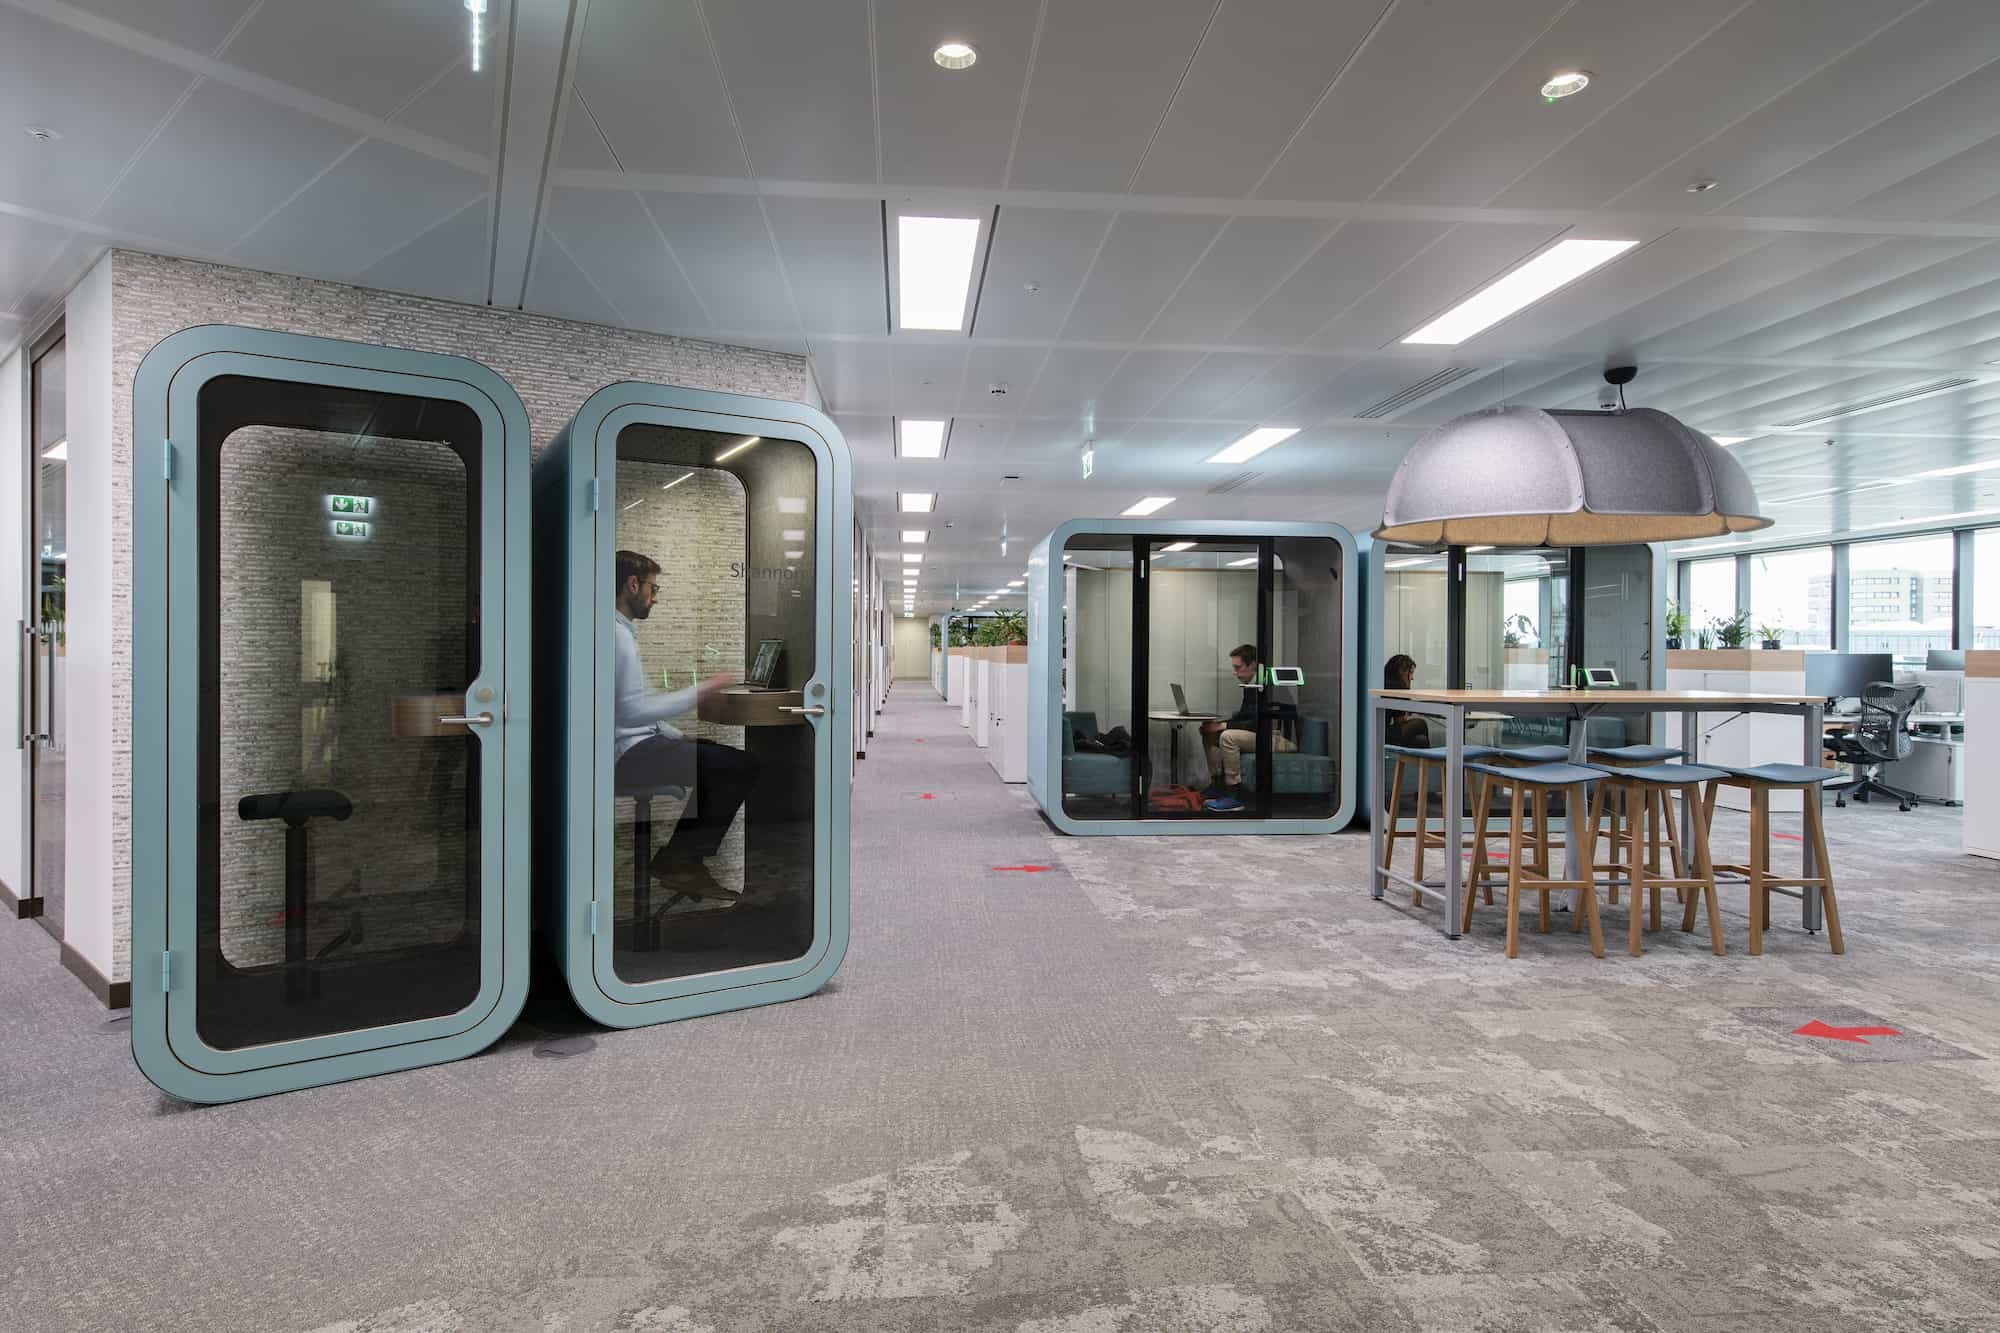 Office pods